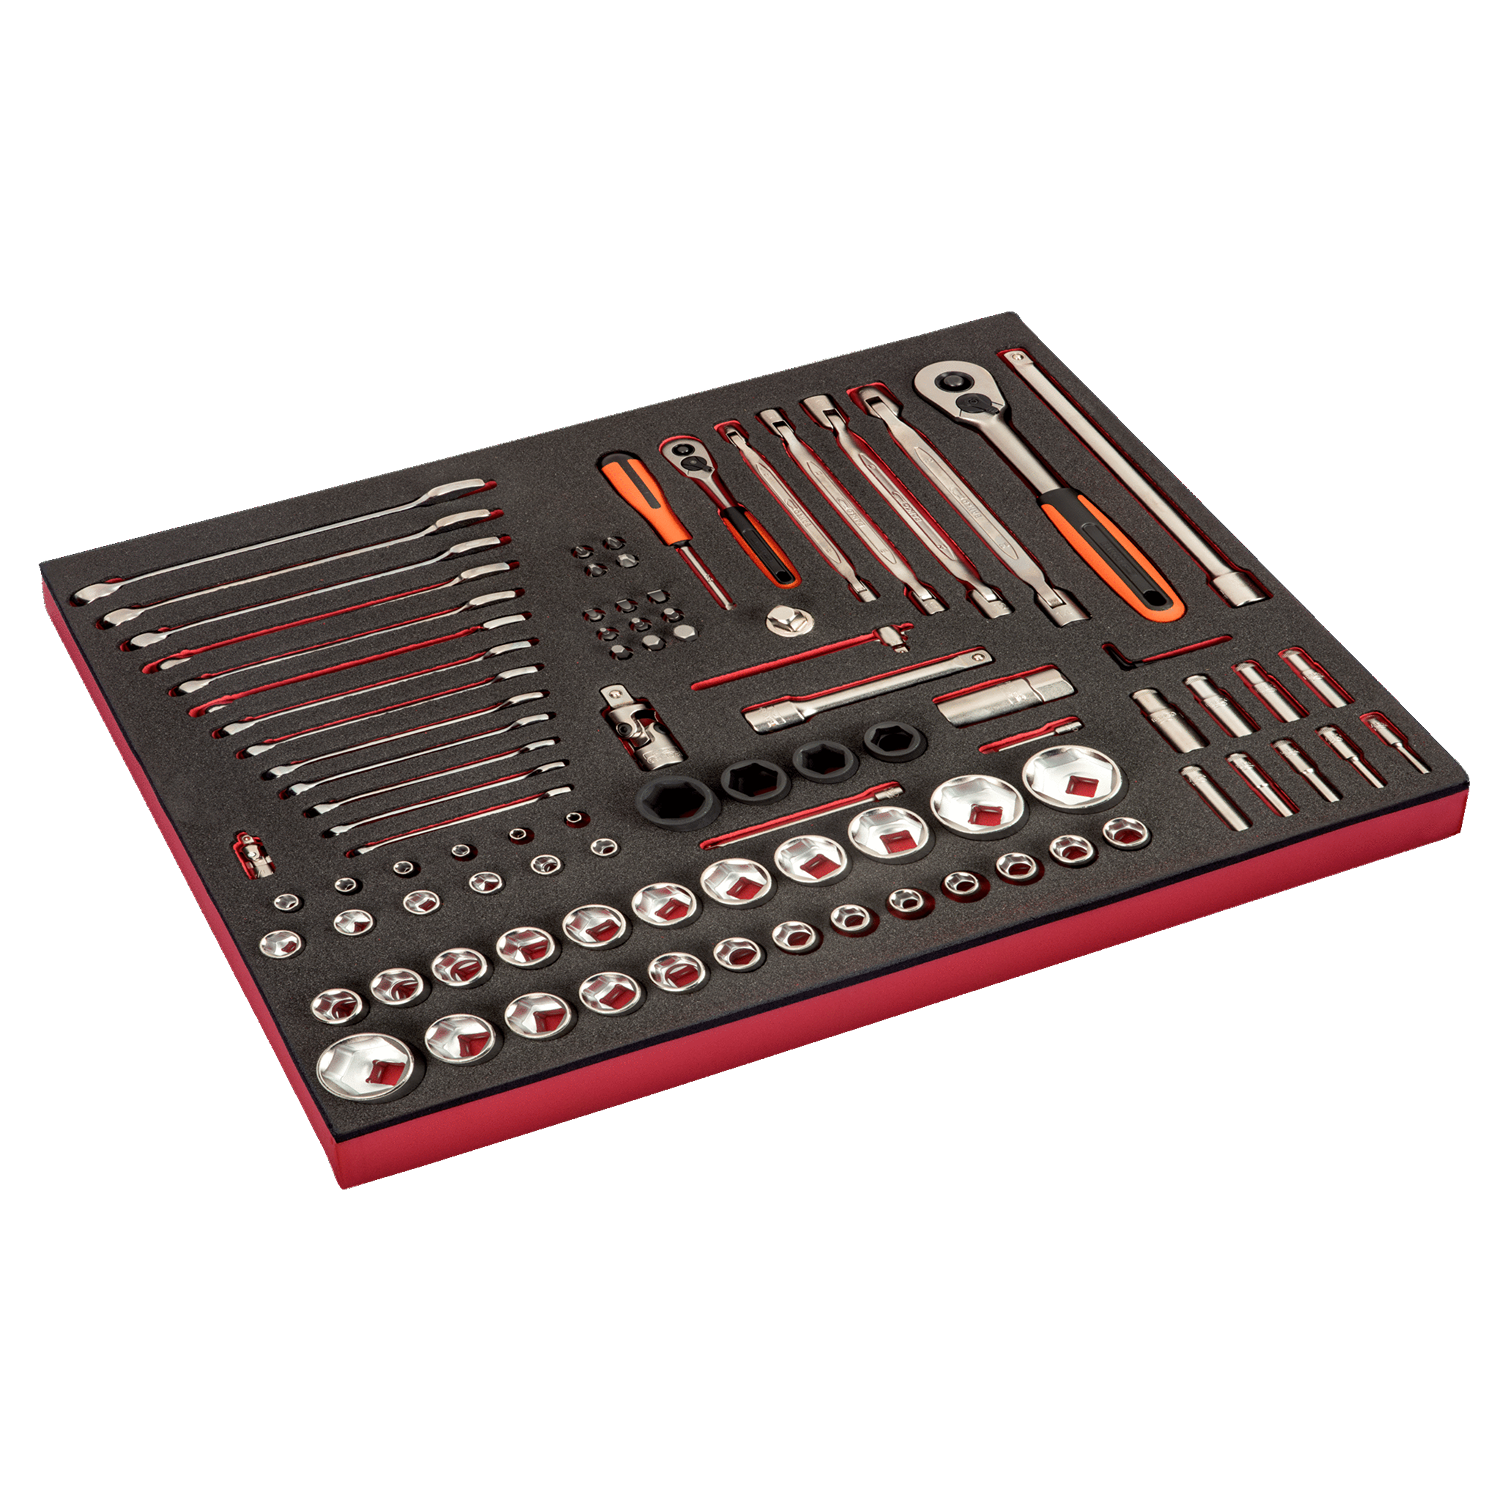 BAHCO FF1A153 Fit&Go 3/3 Foam Inlay 1/4 & 1/2 Socket Set & Pliers - Premium Socket Set from BAHCO - Shop now at Yew Aik.